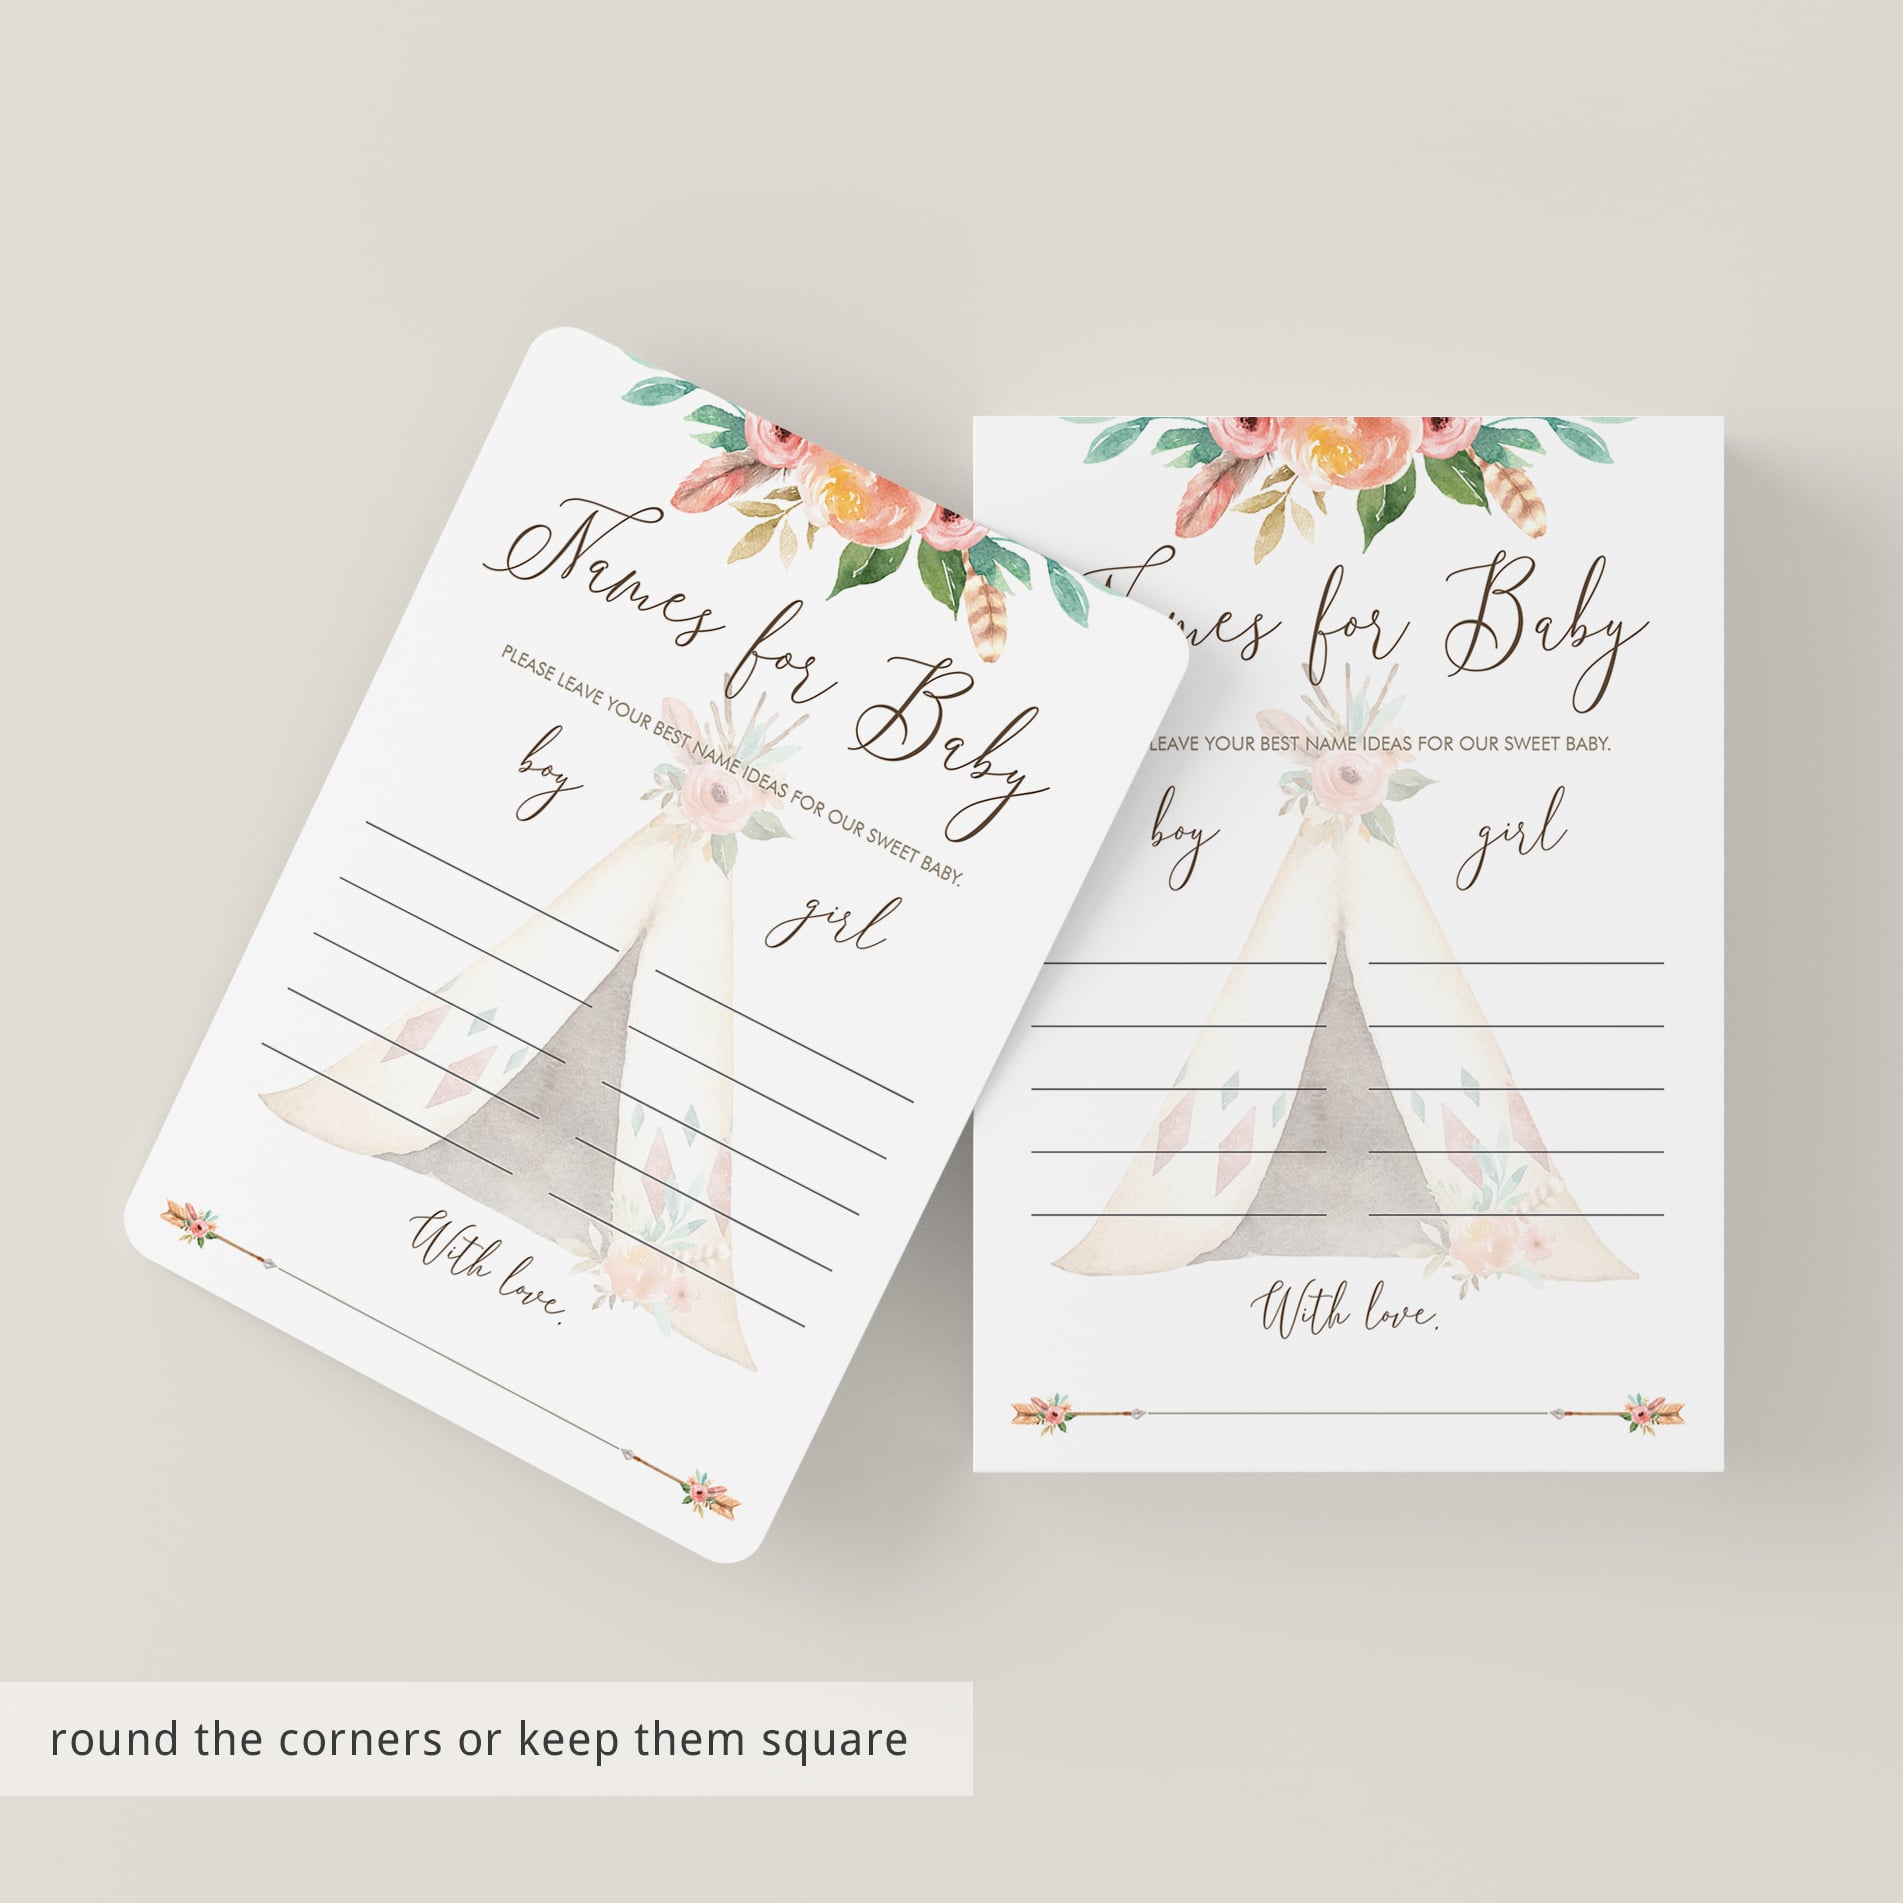 Boy and girl name suggestion cards for gender reveal party by LittleSizzle